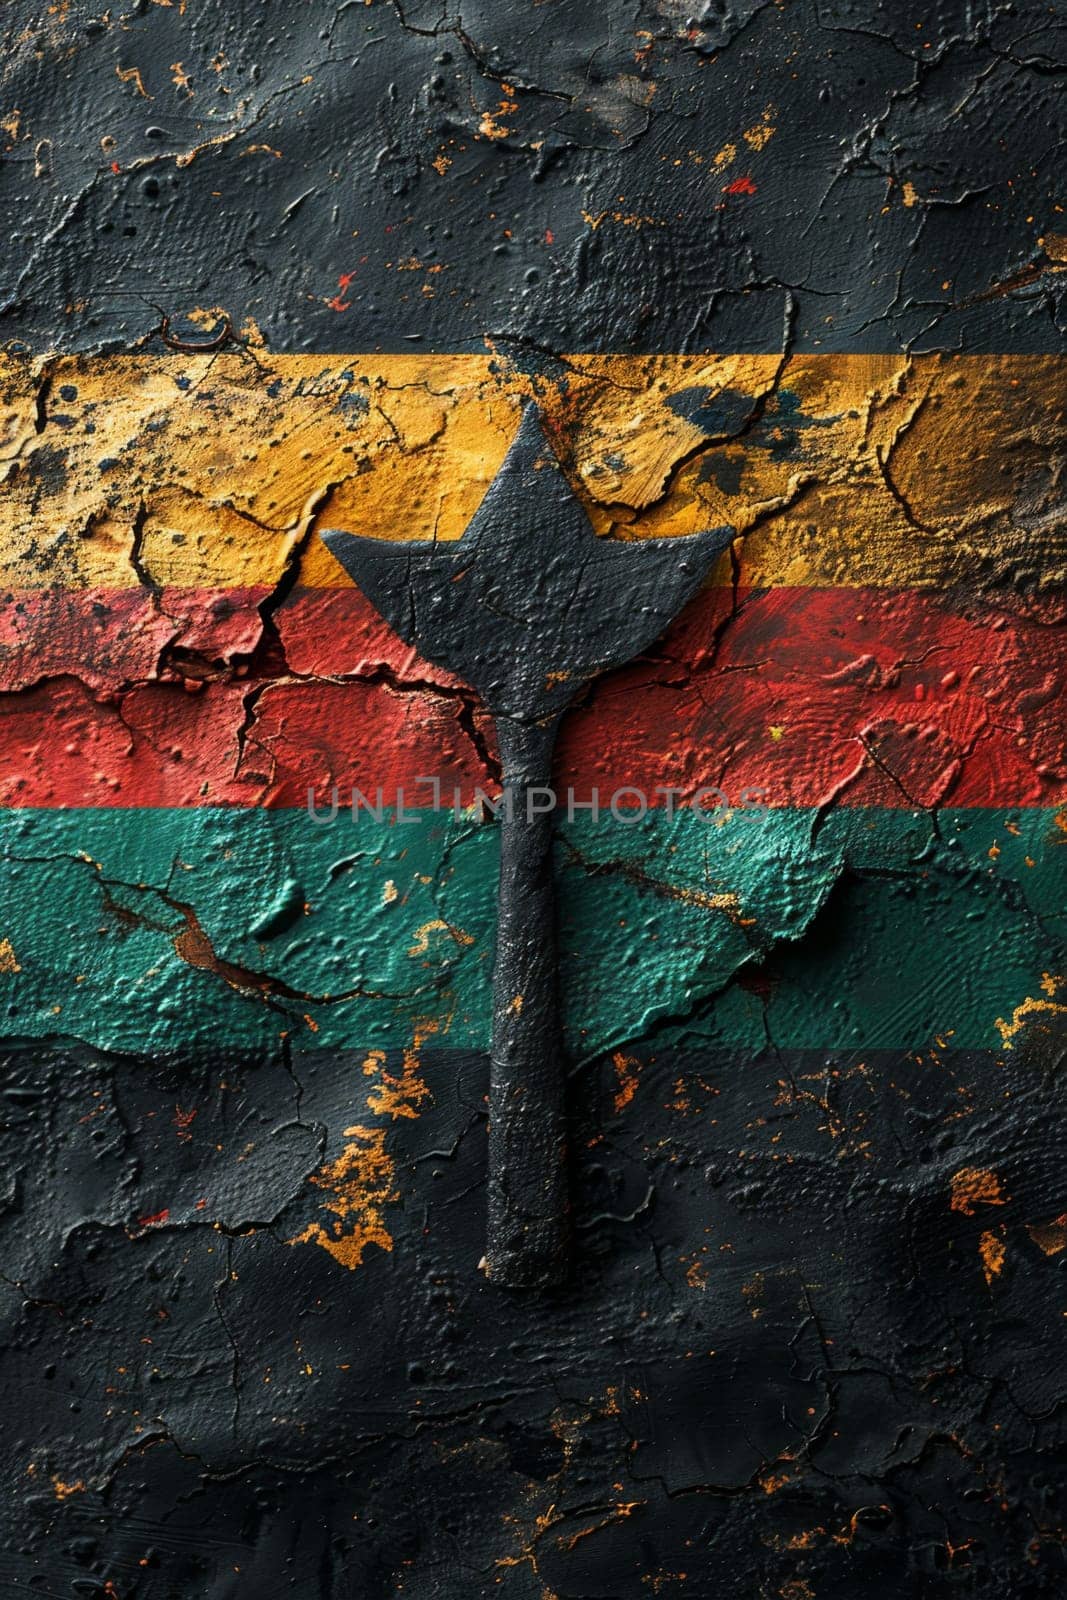 Background in African colors, yellow, green, red and black . Background symbolizing the abolition of slavery in the USA by Lobachad